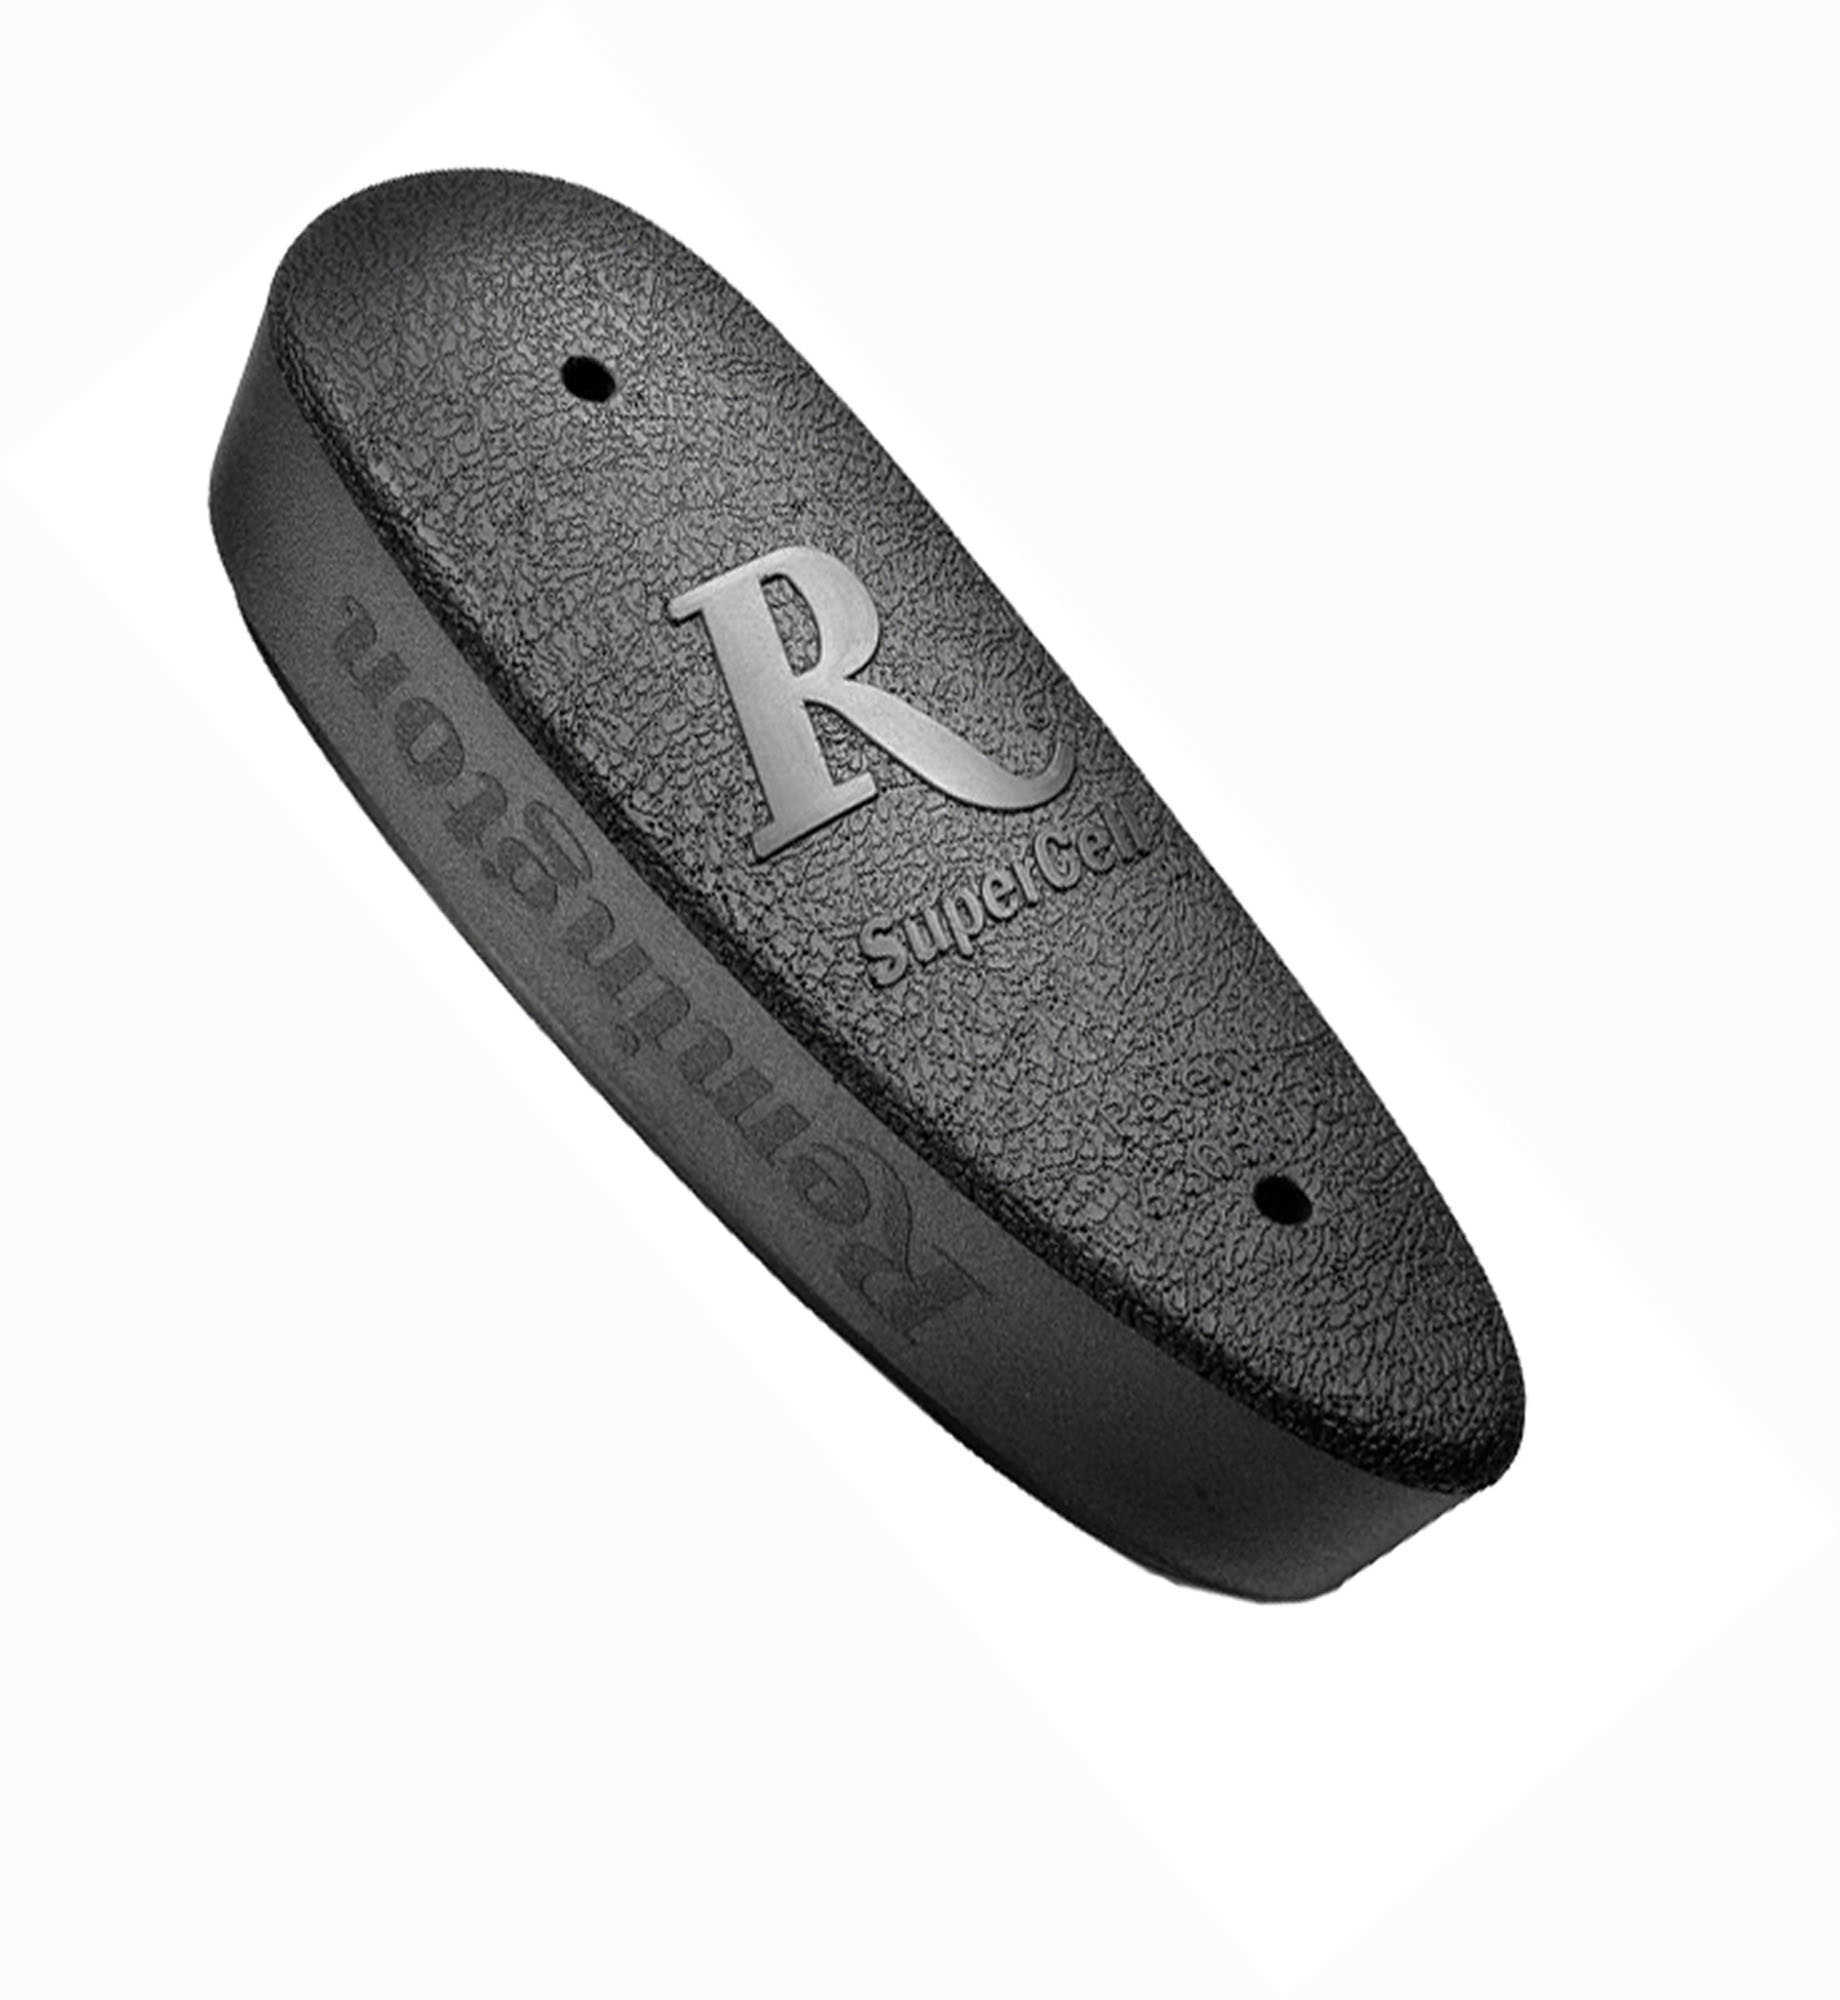 Remington Supercell Recoil Pad Super Cell 1